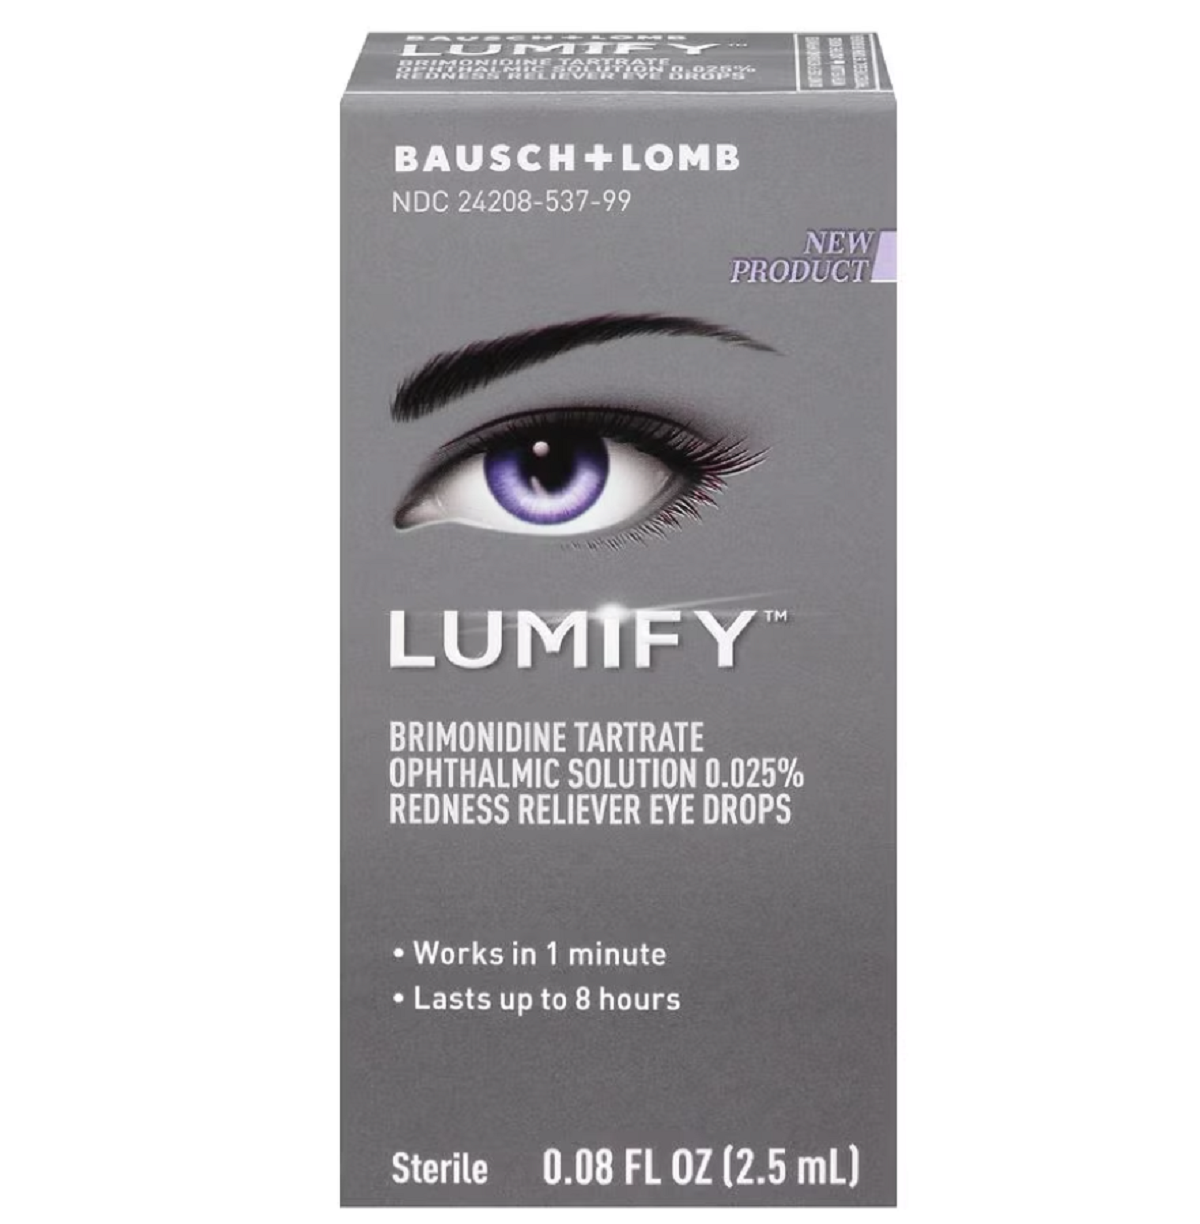 Bausch + Lomb Lumify Redness Reliever Eye Drops, Lumify Redness Reliever Eye Drops